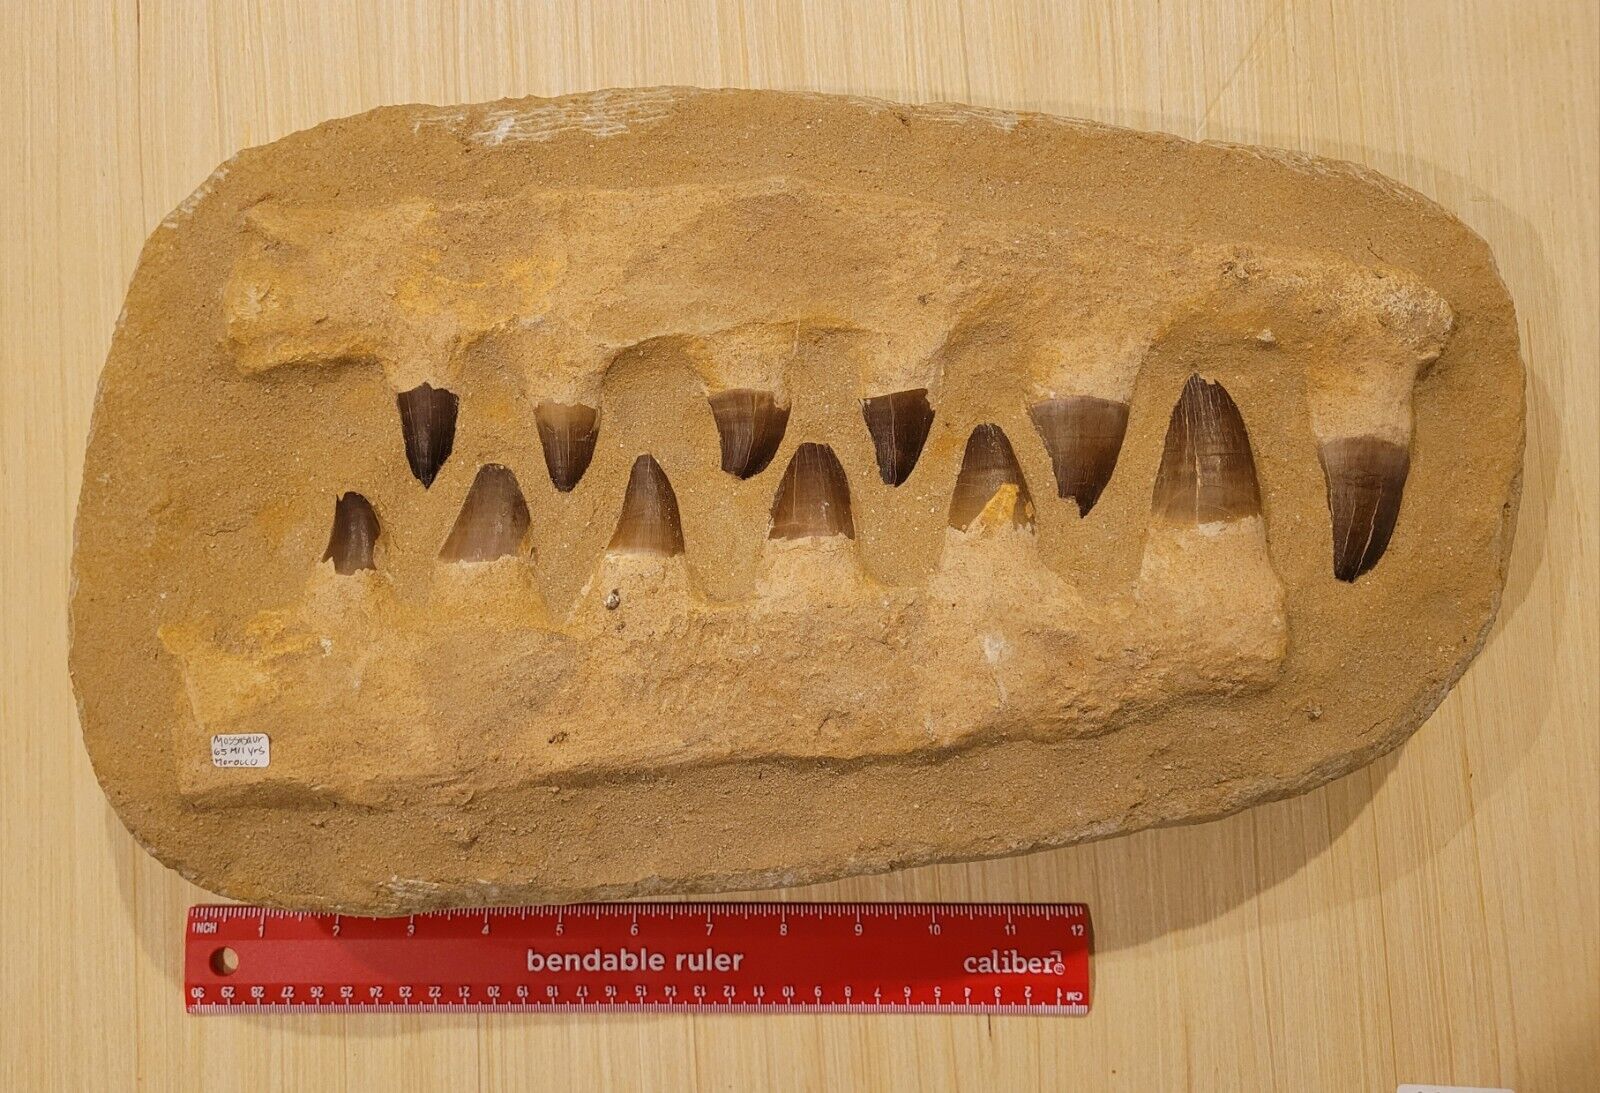 26.3 POUNDS Huge 18 Inch Mosasaurus Dinosaur Fossil Jaw Bone With Giant Teeth